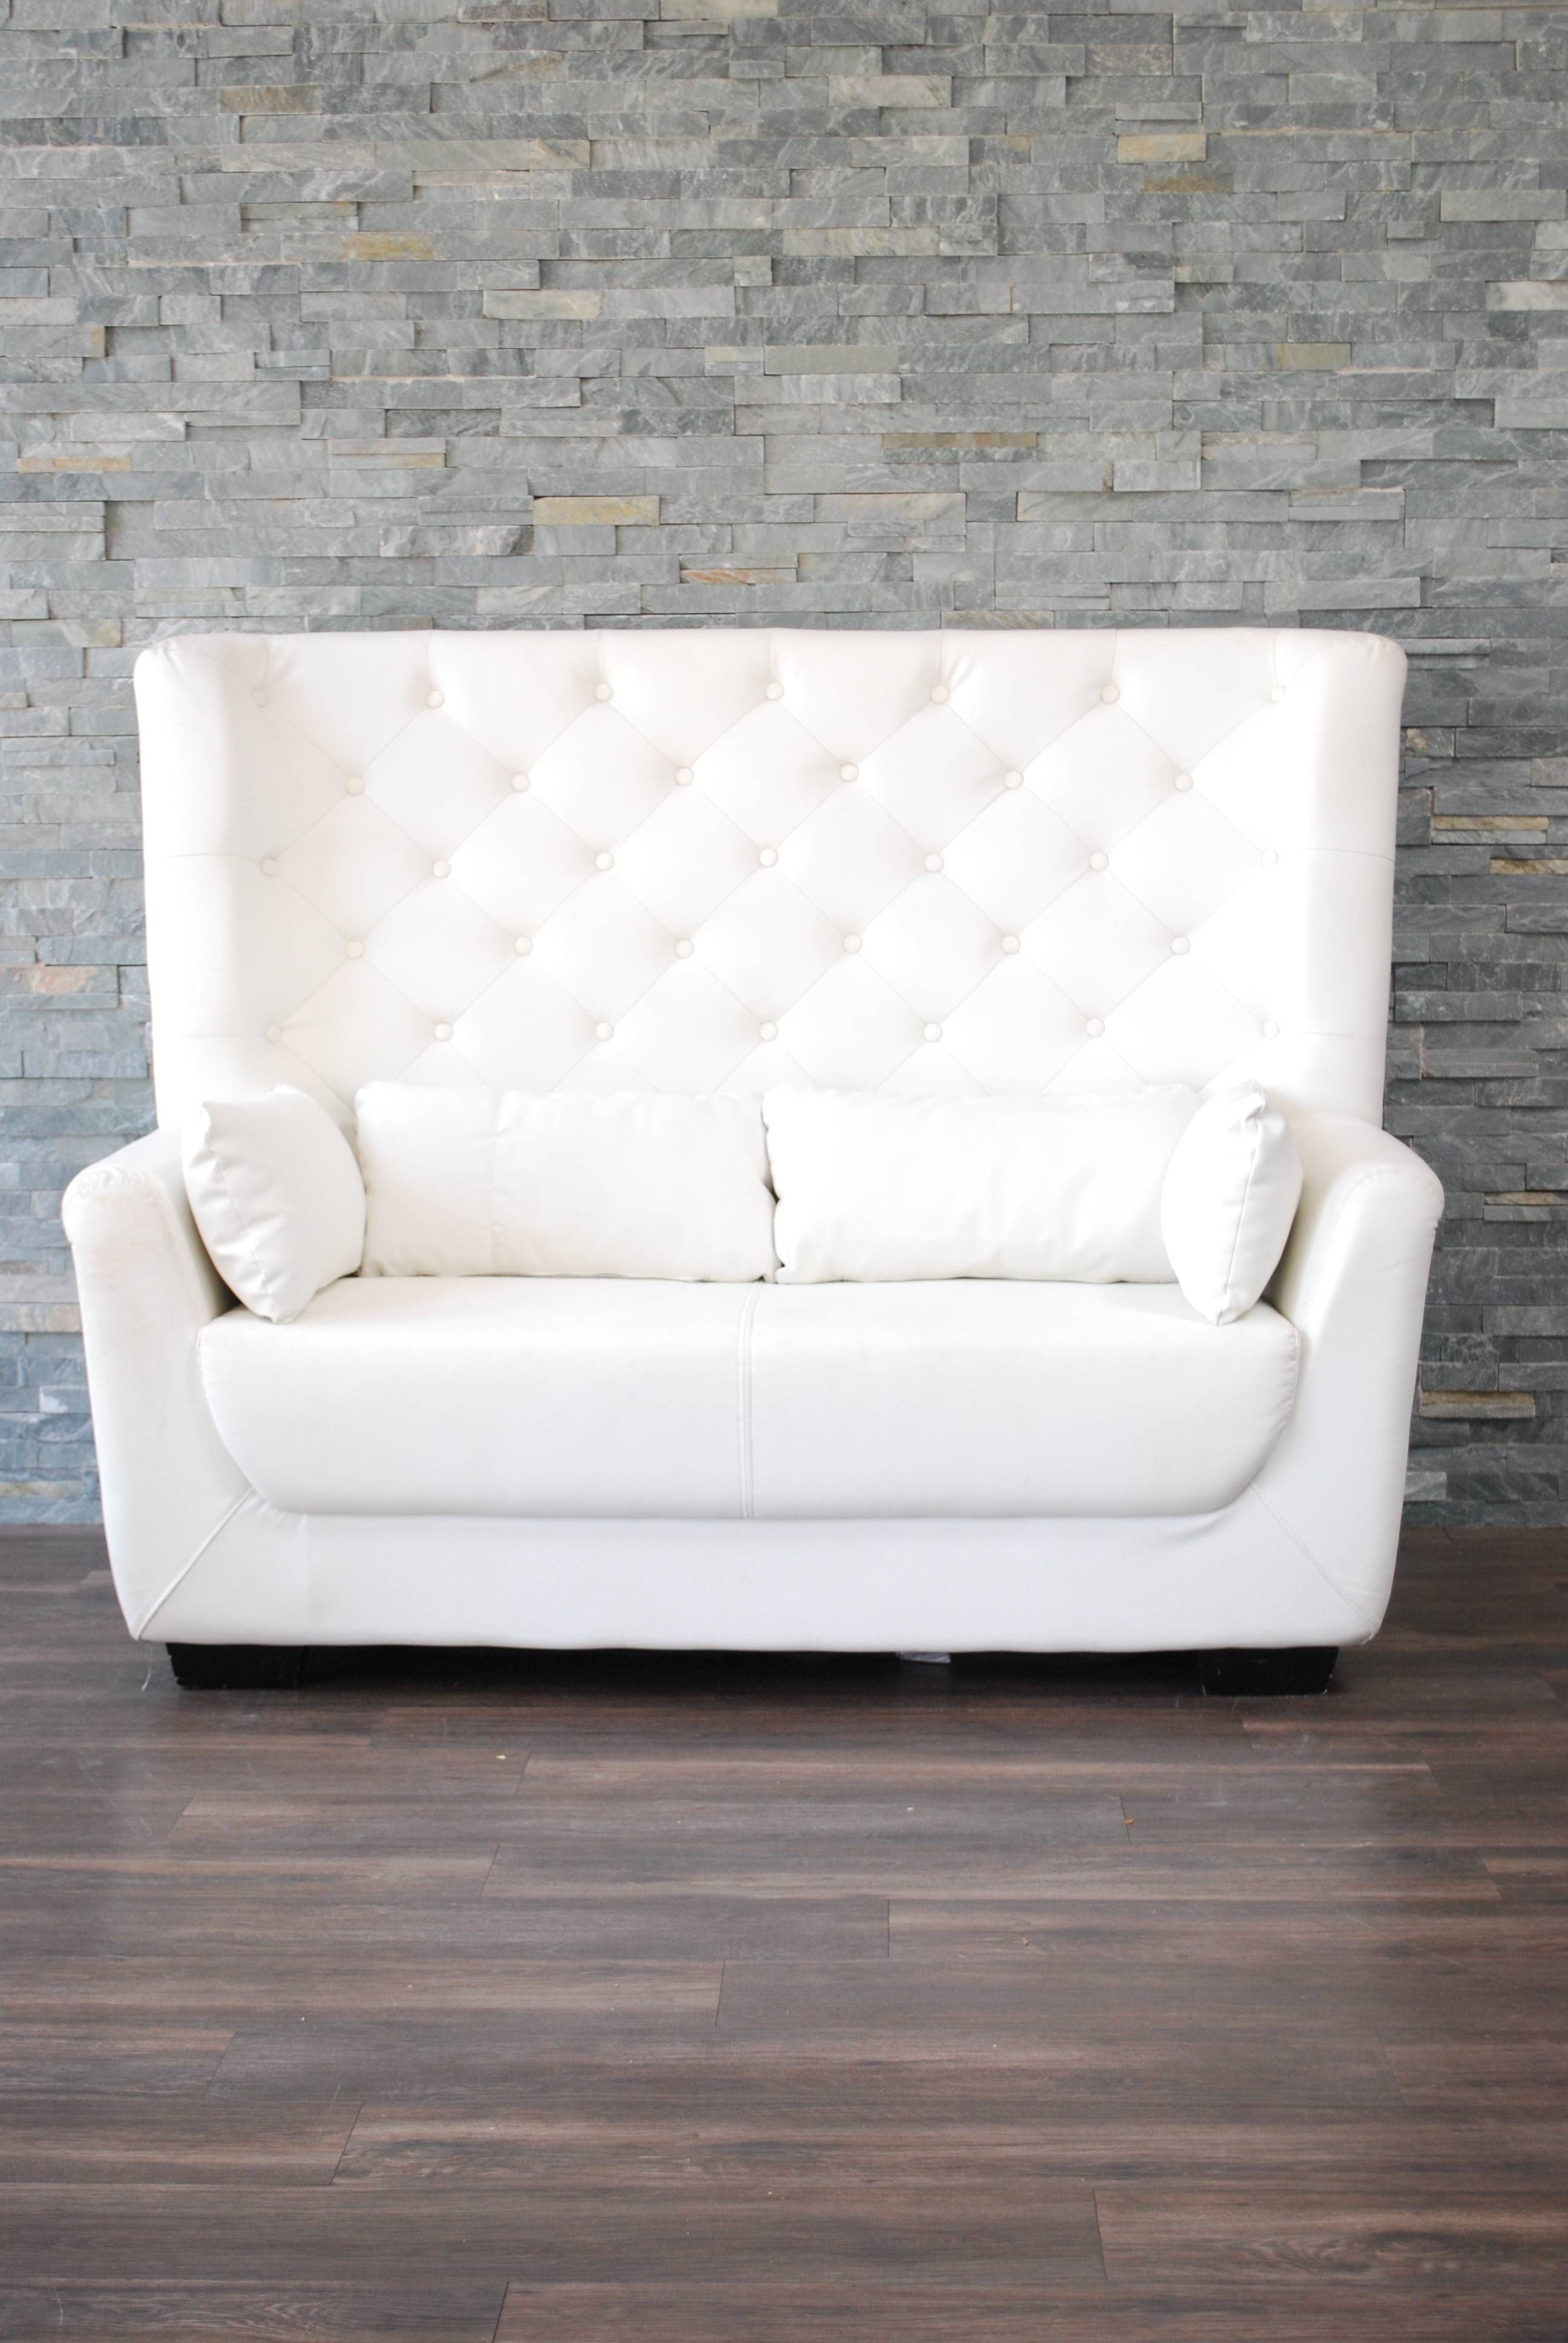 Leather Bench Seat With Back | Bench Decoration Inside Sofas With High Backs (View 19 of 30)